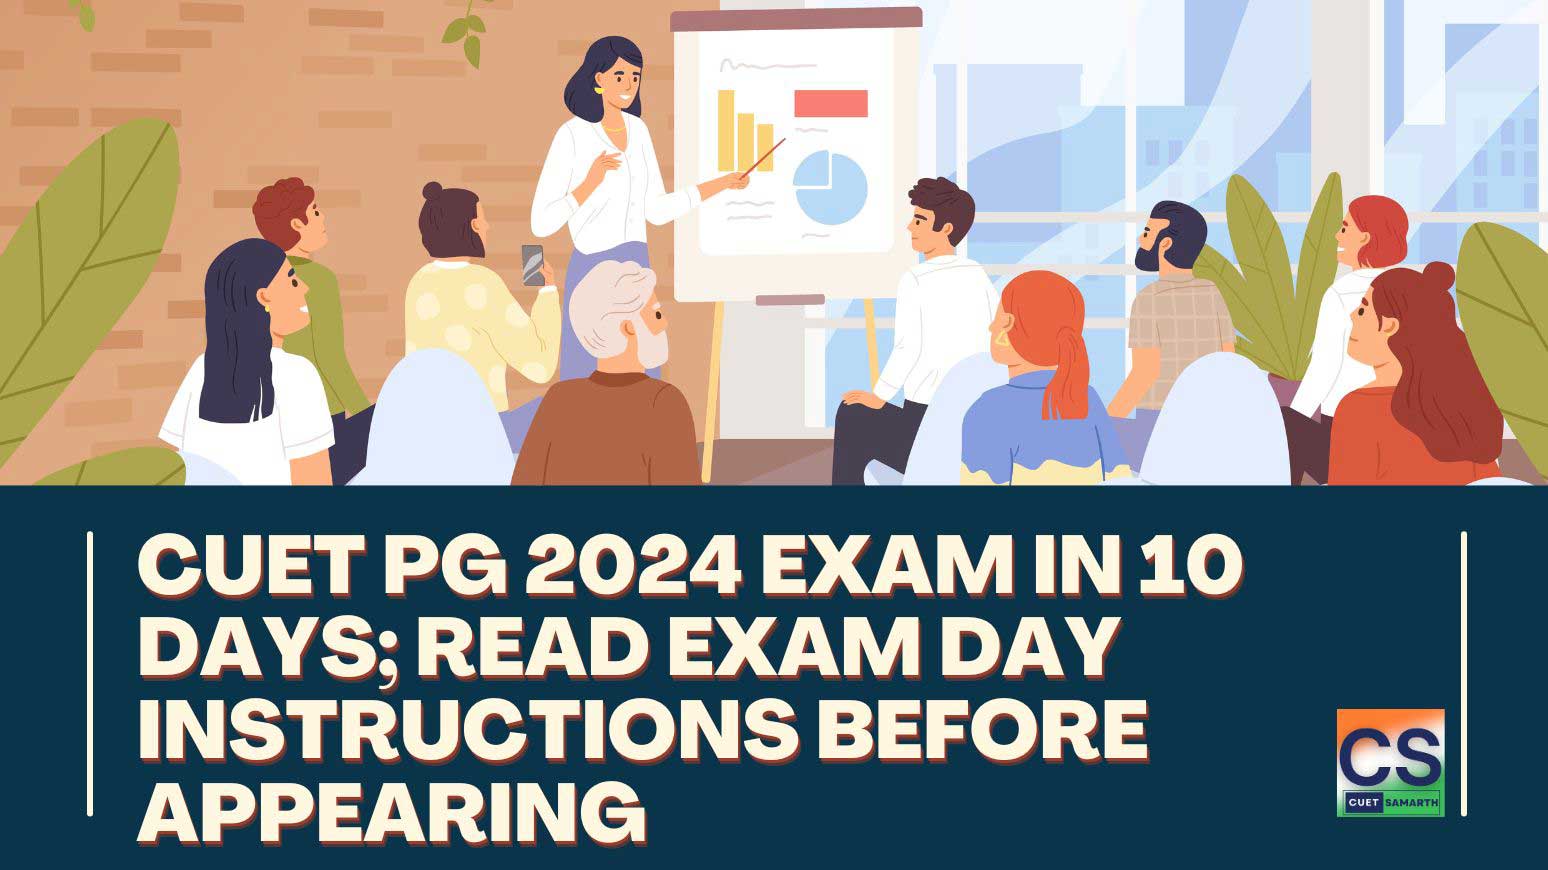 CUET PG 2024 Exam In 10 Days; Read Exam Day Instructions Before Appearing